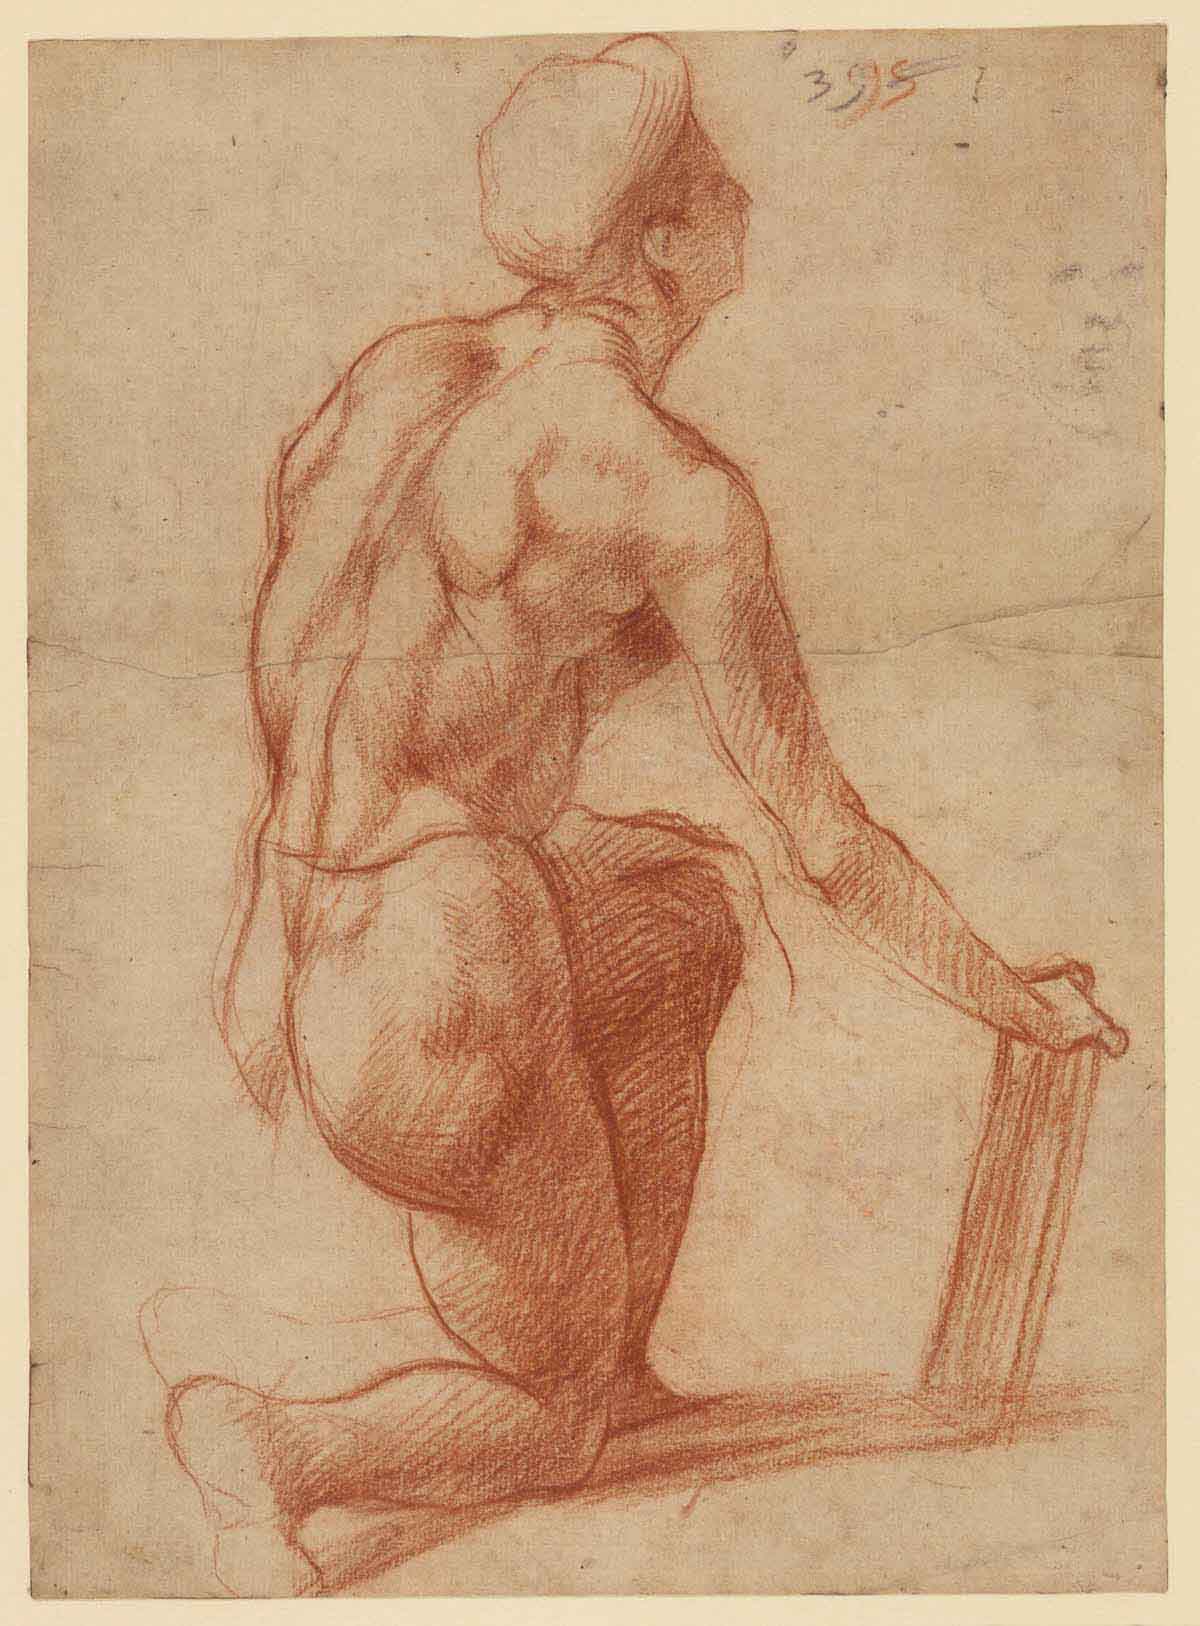 Study of a Kneeling Figure with a Sketch of a Face (recto); Figure Study and Face (verso) gm-00006101